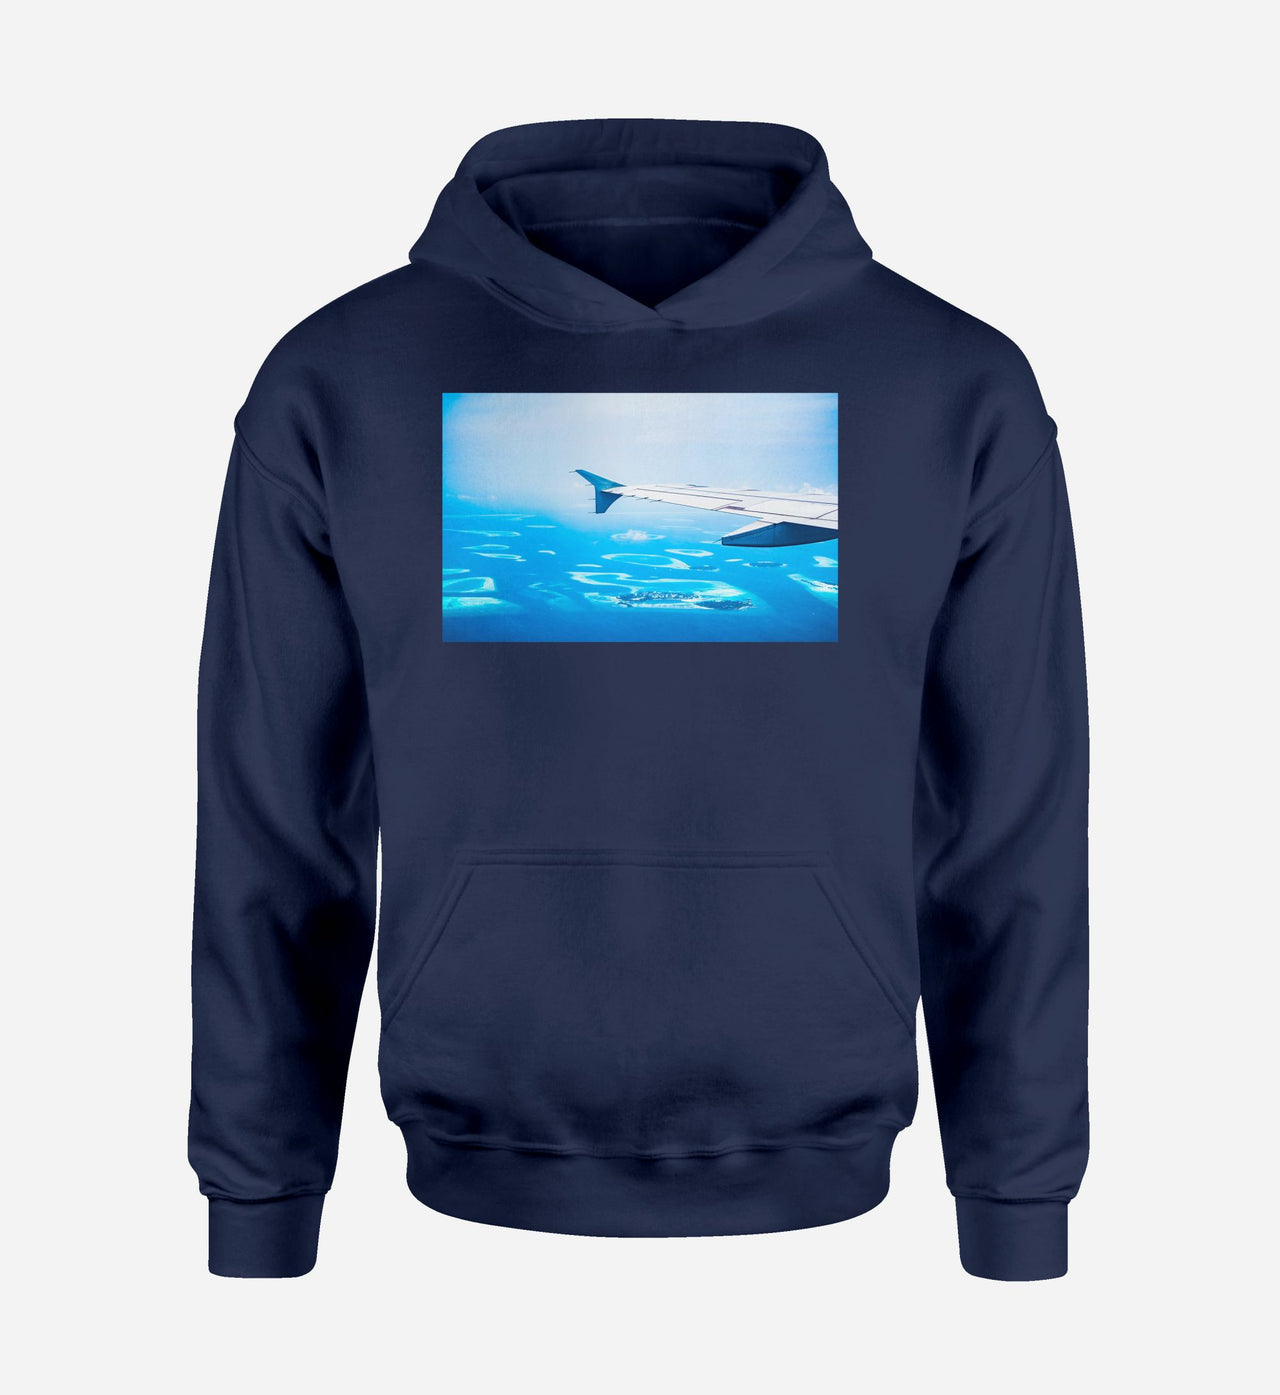 Outstanding View Through Airplane Wing Designed Hoodies